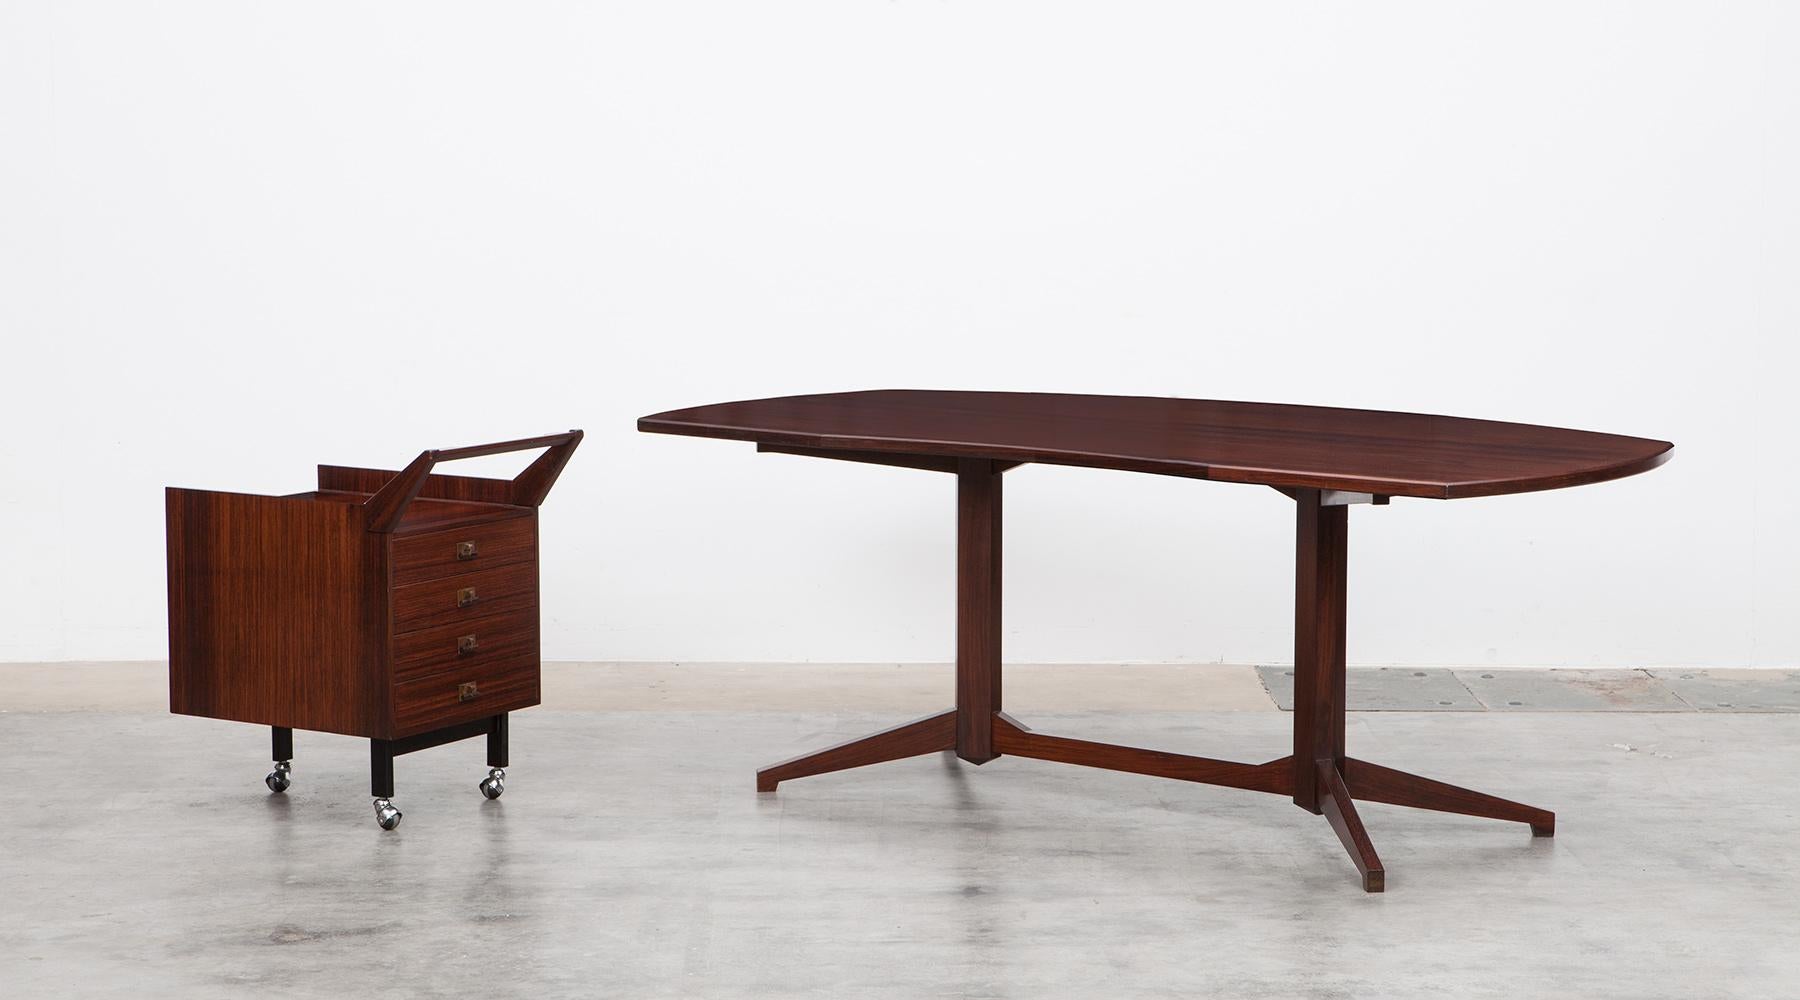 Office Set, Desk & container, wood, brass details, Franco Ablini for Poggi, Italy, 1956.

This amazing set of a Desk and a container by Italian designer Franco Albini comes in lavish wood. The table top has been restored at some parts. The whole